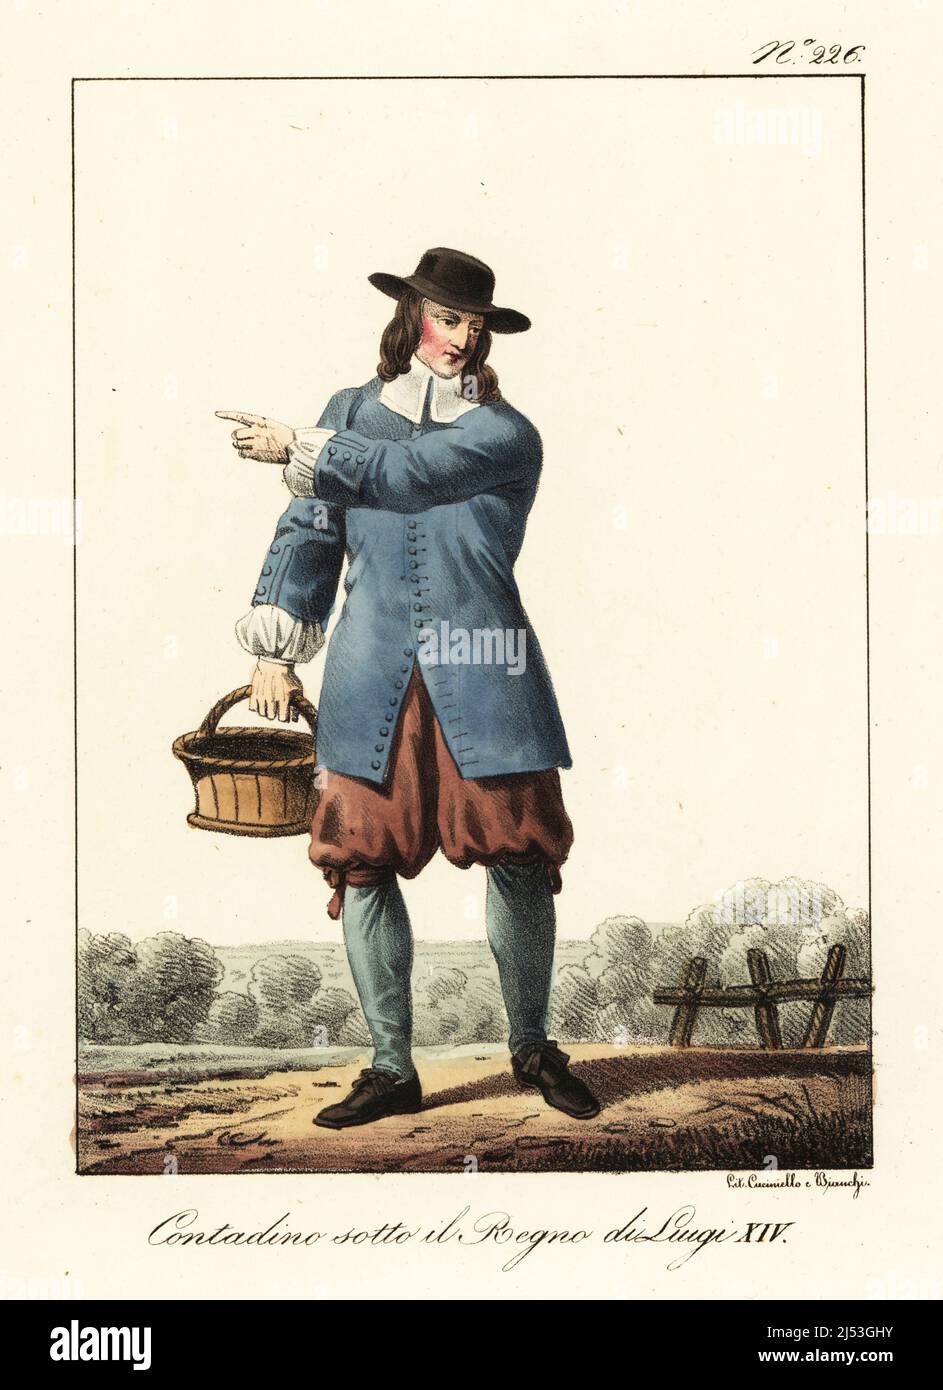 Costume of a French peasant in the mid 1600s. In hat, blue coat, cotton shirt, knee-length breeches, gaiters, holding a basket. Paysan sous le Regne de Louis XIV. Handcoloured lithograph by Lorenzo Bianchi and Domenico Cuciniello after Hippolyte Lecomte from Costumi civili e militari della monarchia francese dal 1200 al 1820, Naples, 1825. Italian edition of Lecomte’s Civilian and military costumes of the French monarchy from 1200 to 1820. Stock Photo